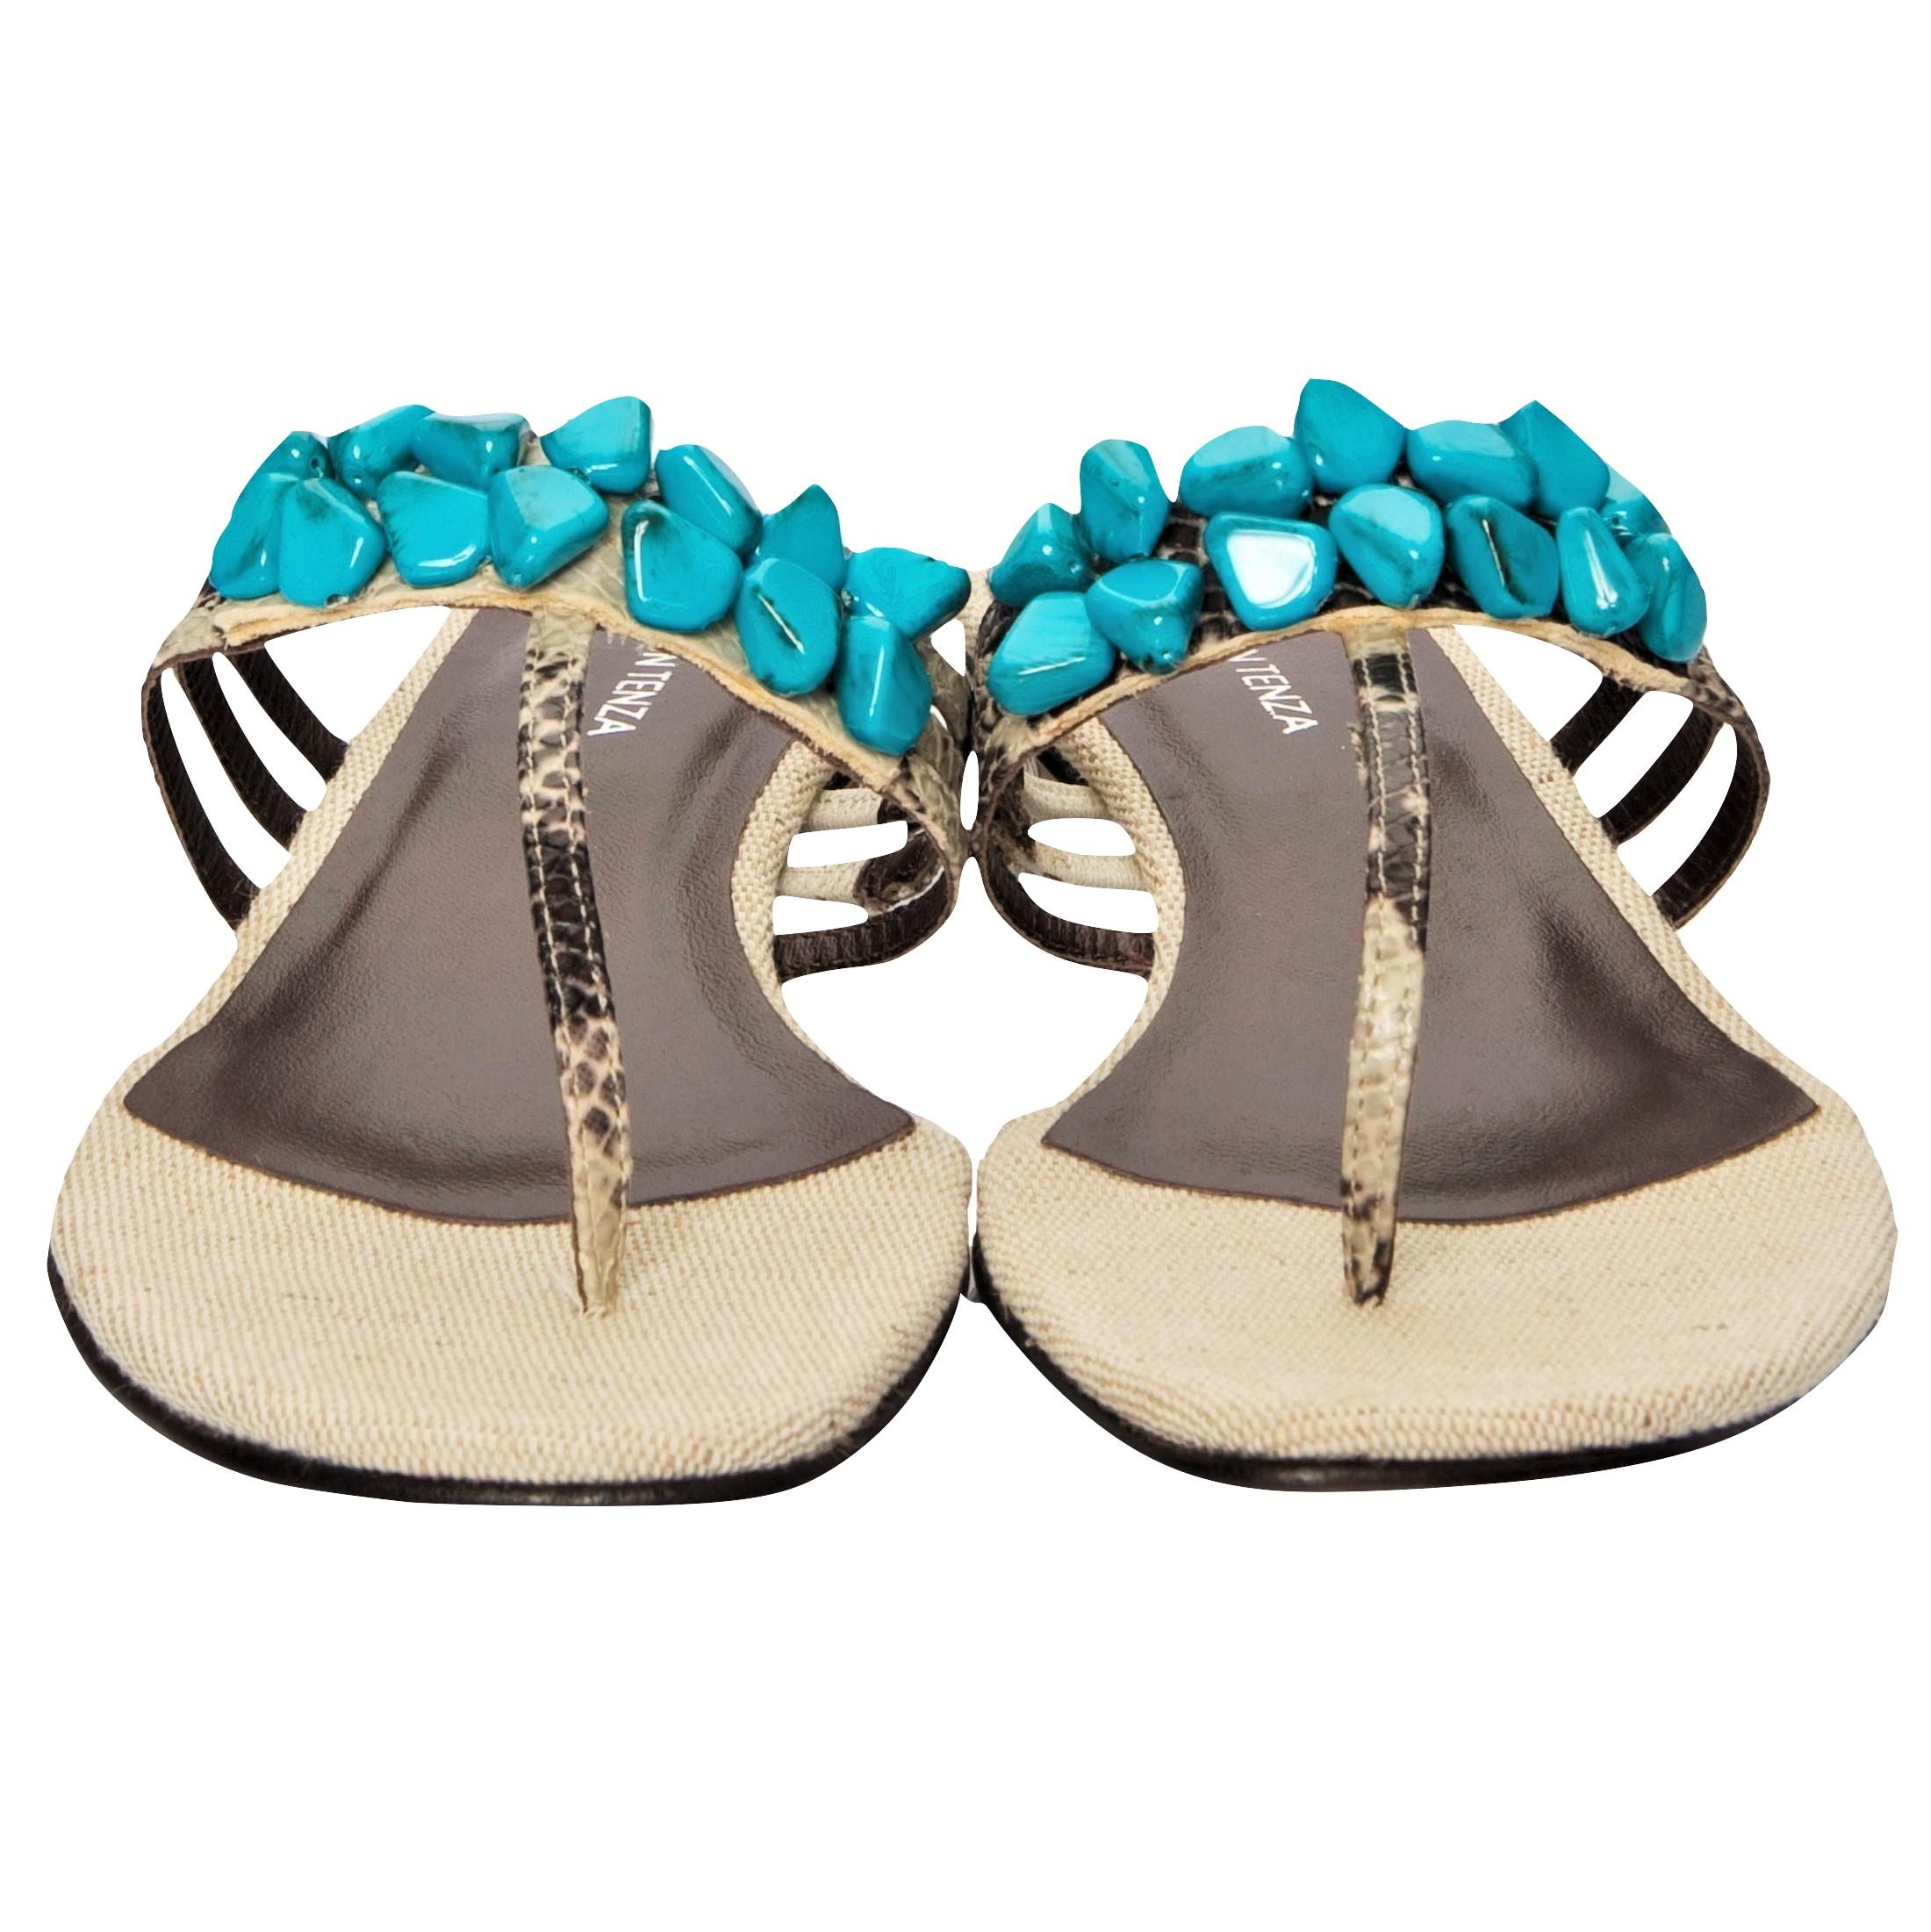 Ramon Tenza Spain
Brand New
Beige & Turquoise Thong Sandals
* Padded Leather Footbed
* Snakeskin Heel & Strap
* Faux Turquoise Beading
* Size: 8.5
* 1.25